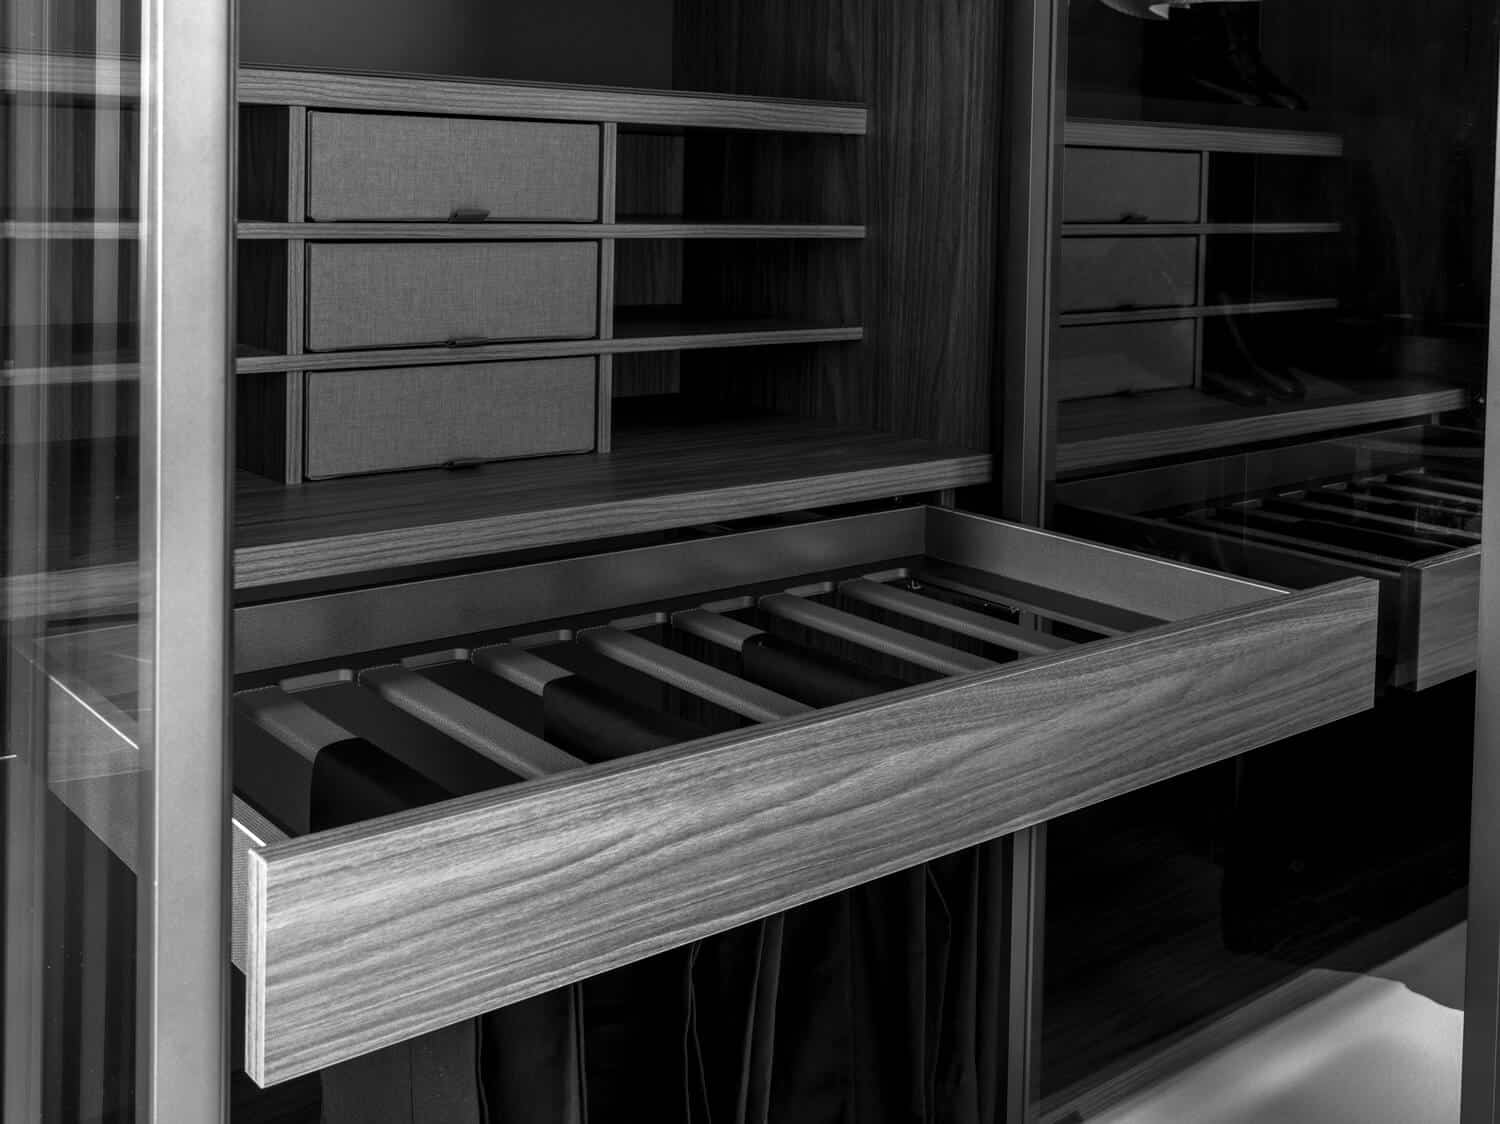 Shelf grids with extractable drawers covered in fabric. Full pull-out trouser rack with rails finished in easy leather to ensure the trousers don’t slid off.